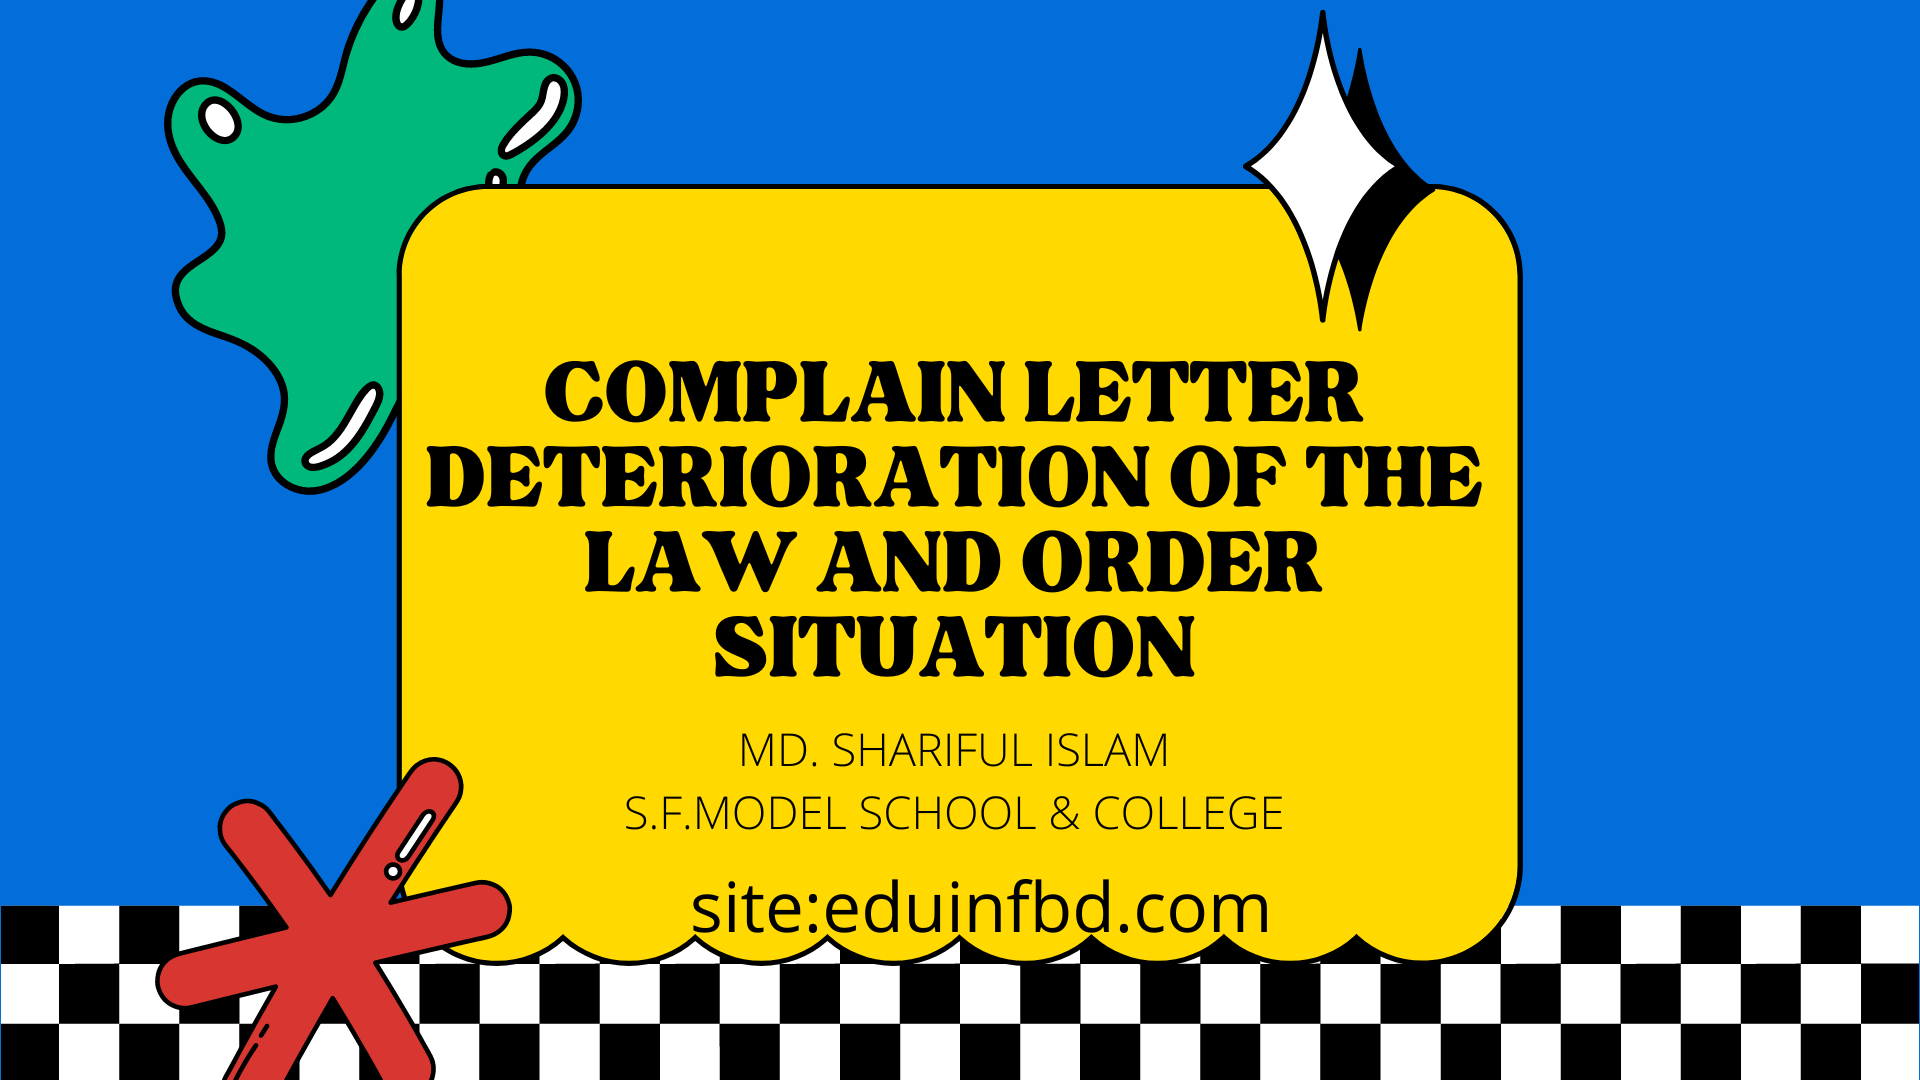 Complain letter deterioration of the law and order situation